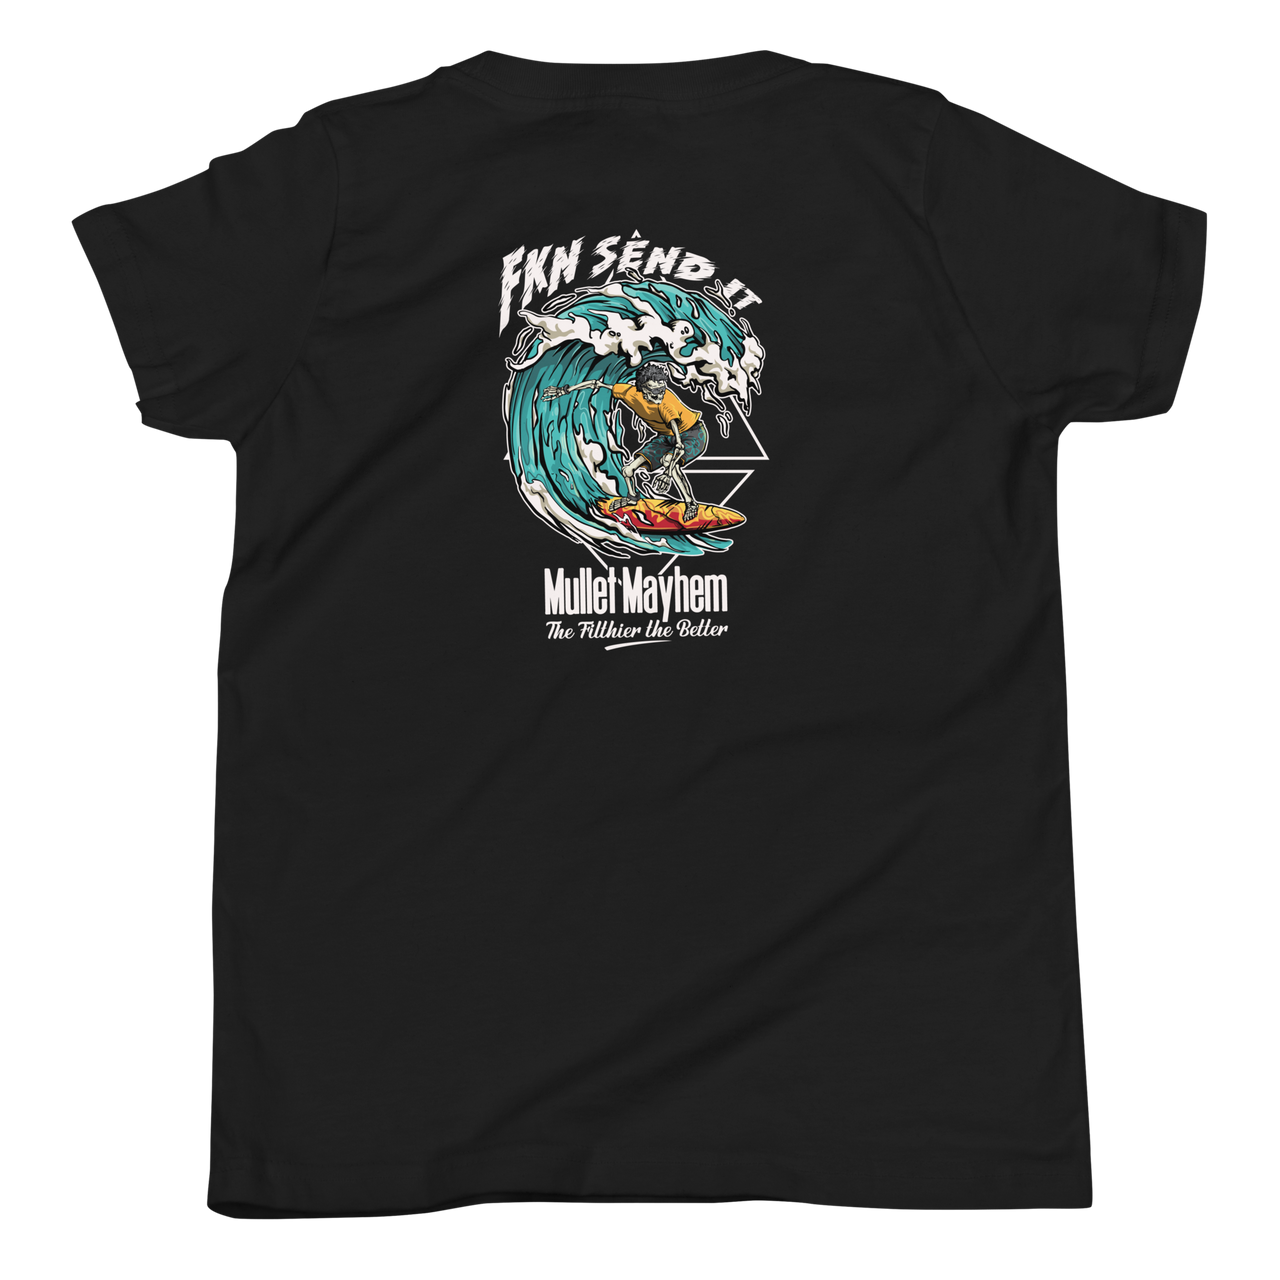 FKN Send It surfing editions ( kids size)